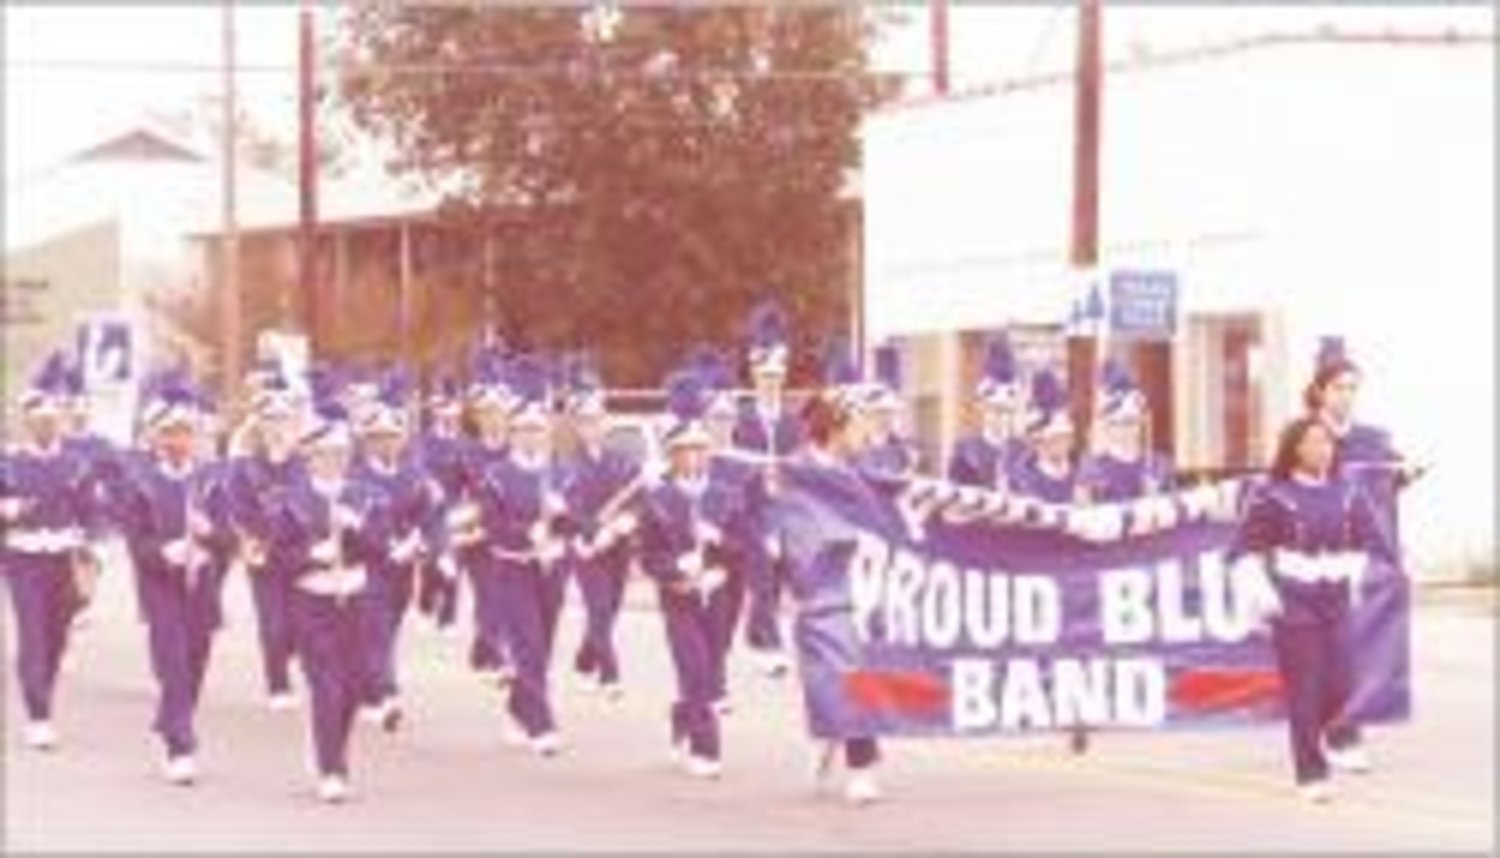 The Proud Blue Band marched proudly Saturday during the Veteran's salute parade in downtown Quitman. The band recently received superior ratings in UIL competition.